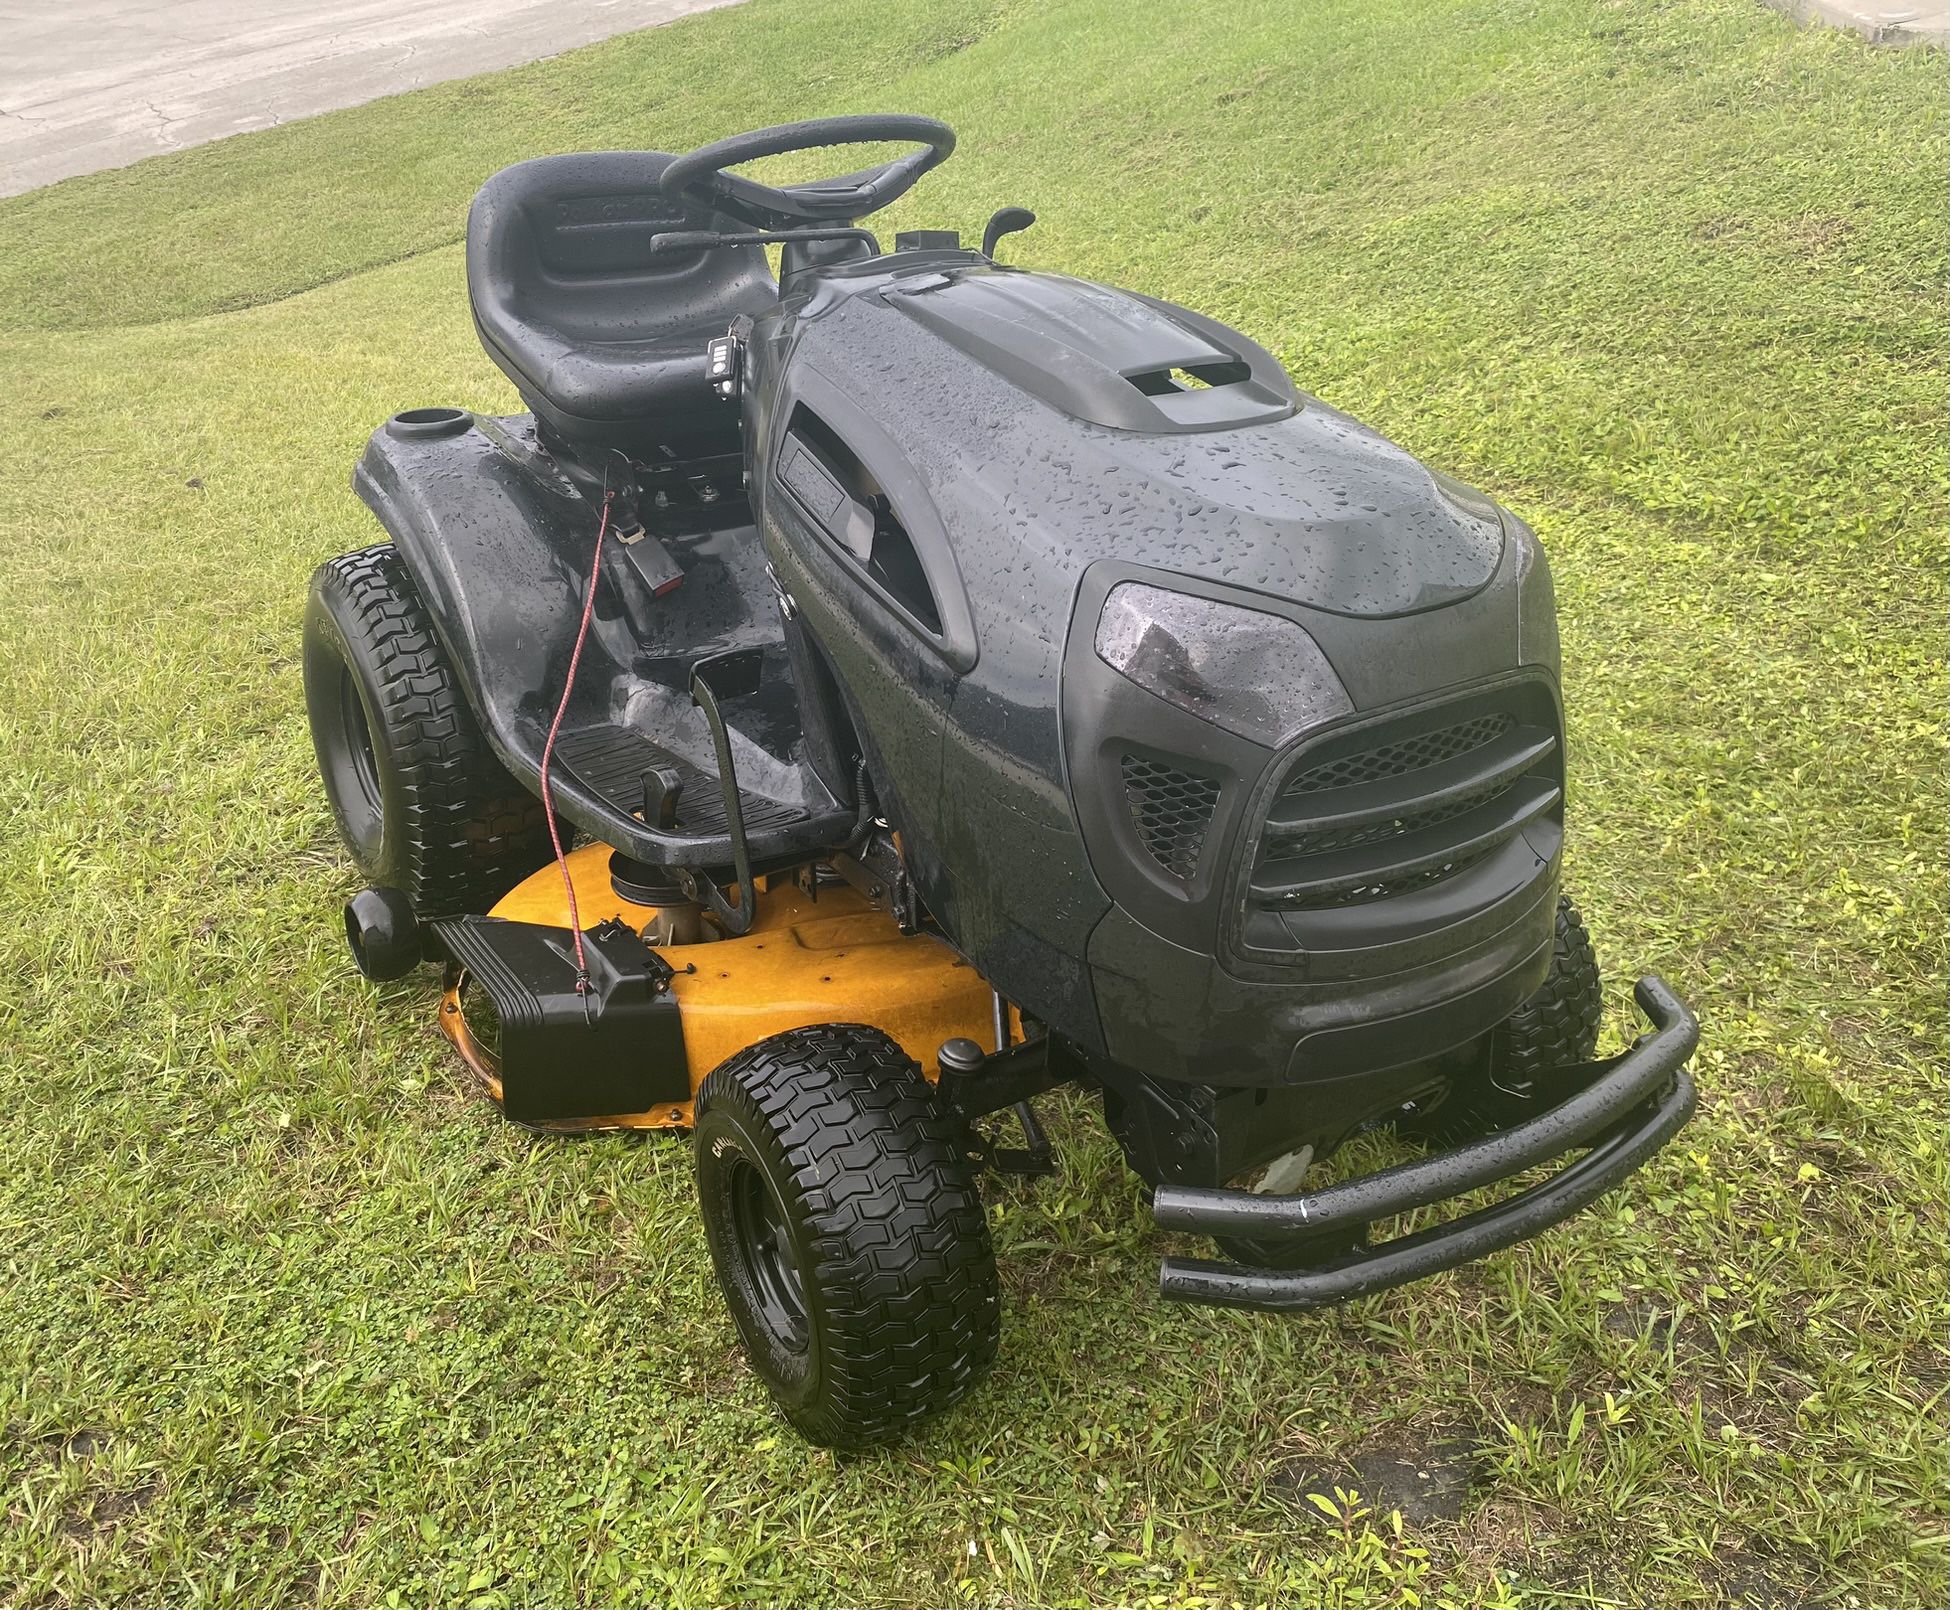 ⭐ VERY FAST 12 MPH ⭐ CUSTOMIZED POULAN PRO 42” RIDING MOWER LAWN GARDEN TRACTOR